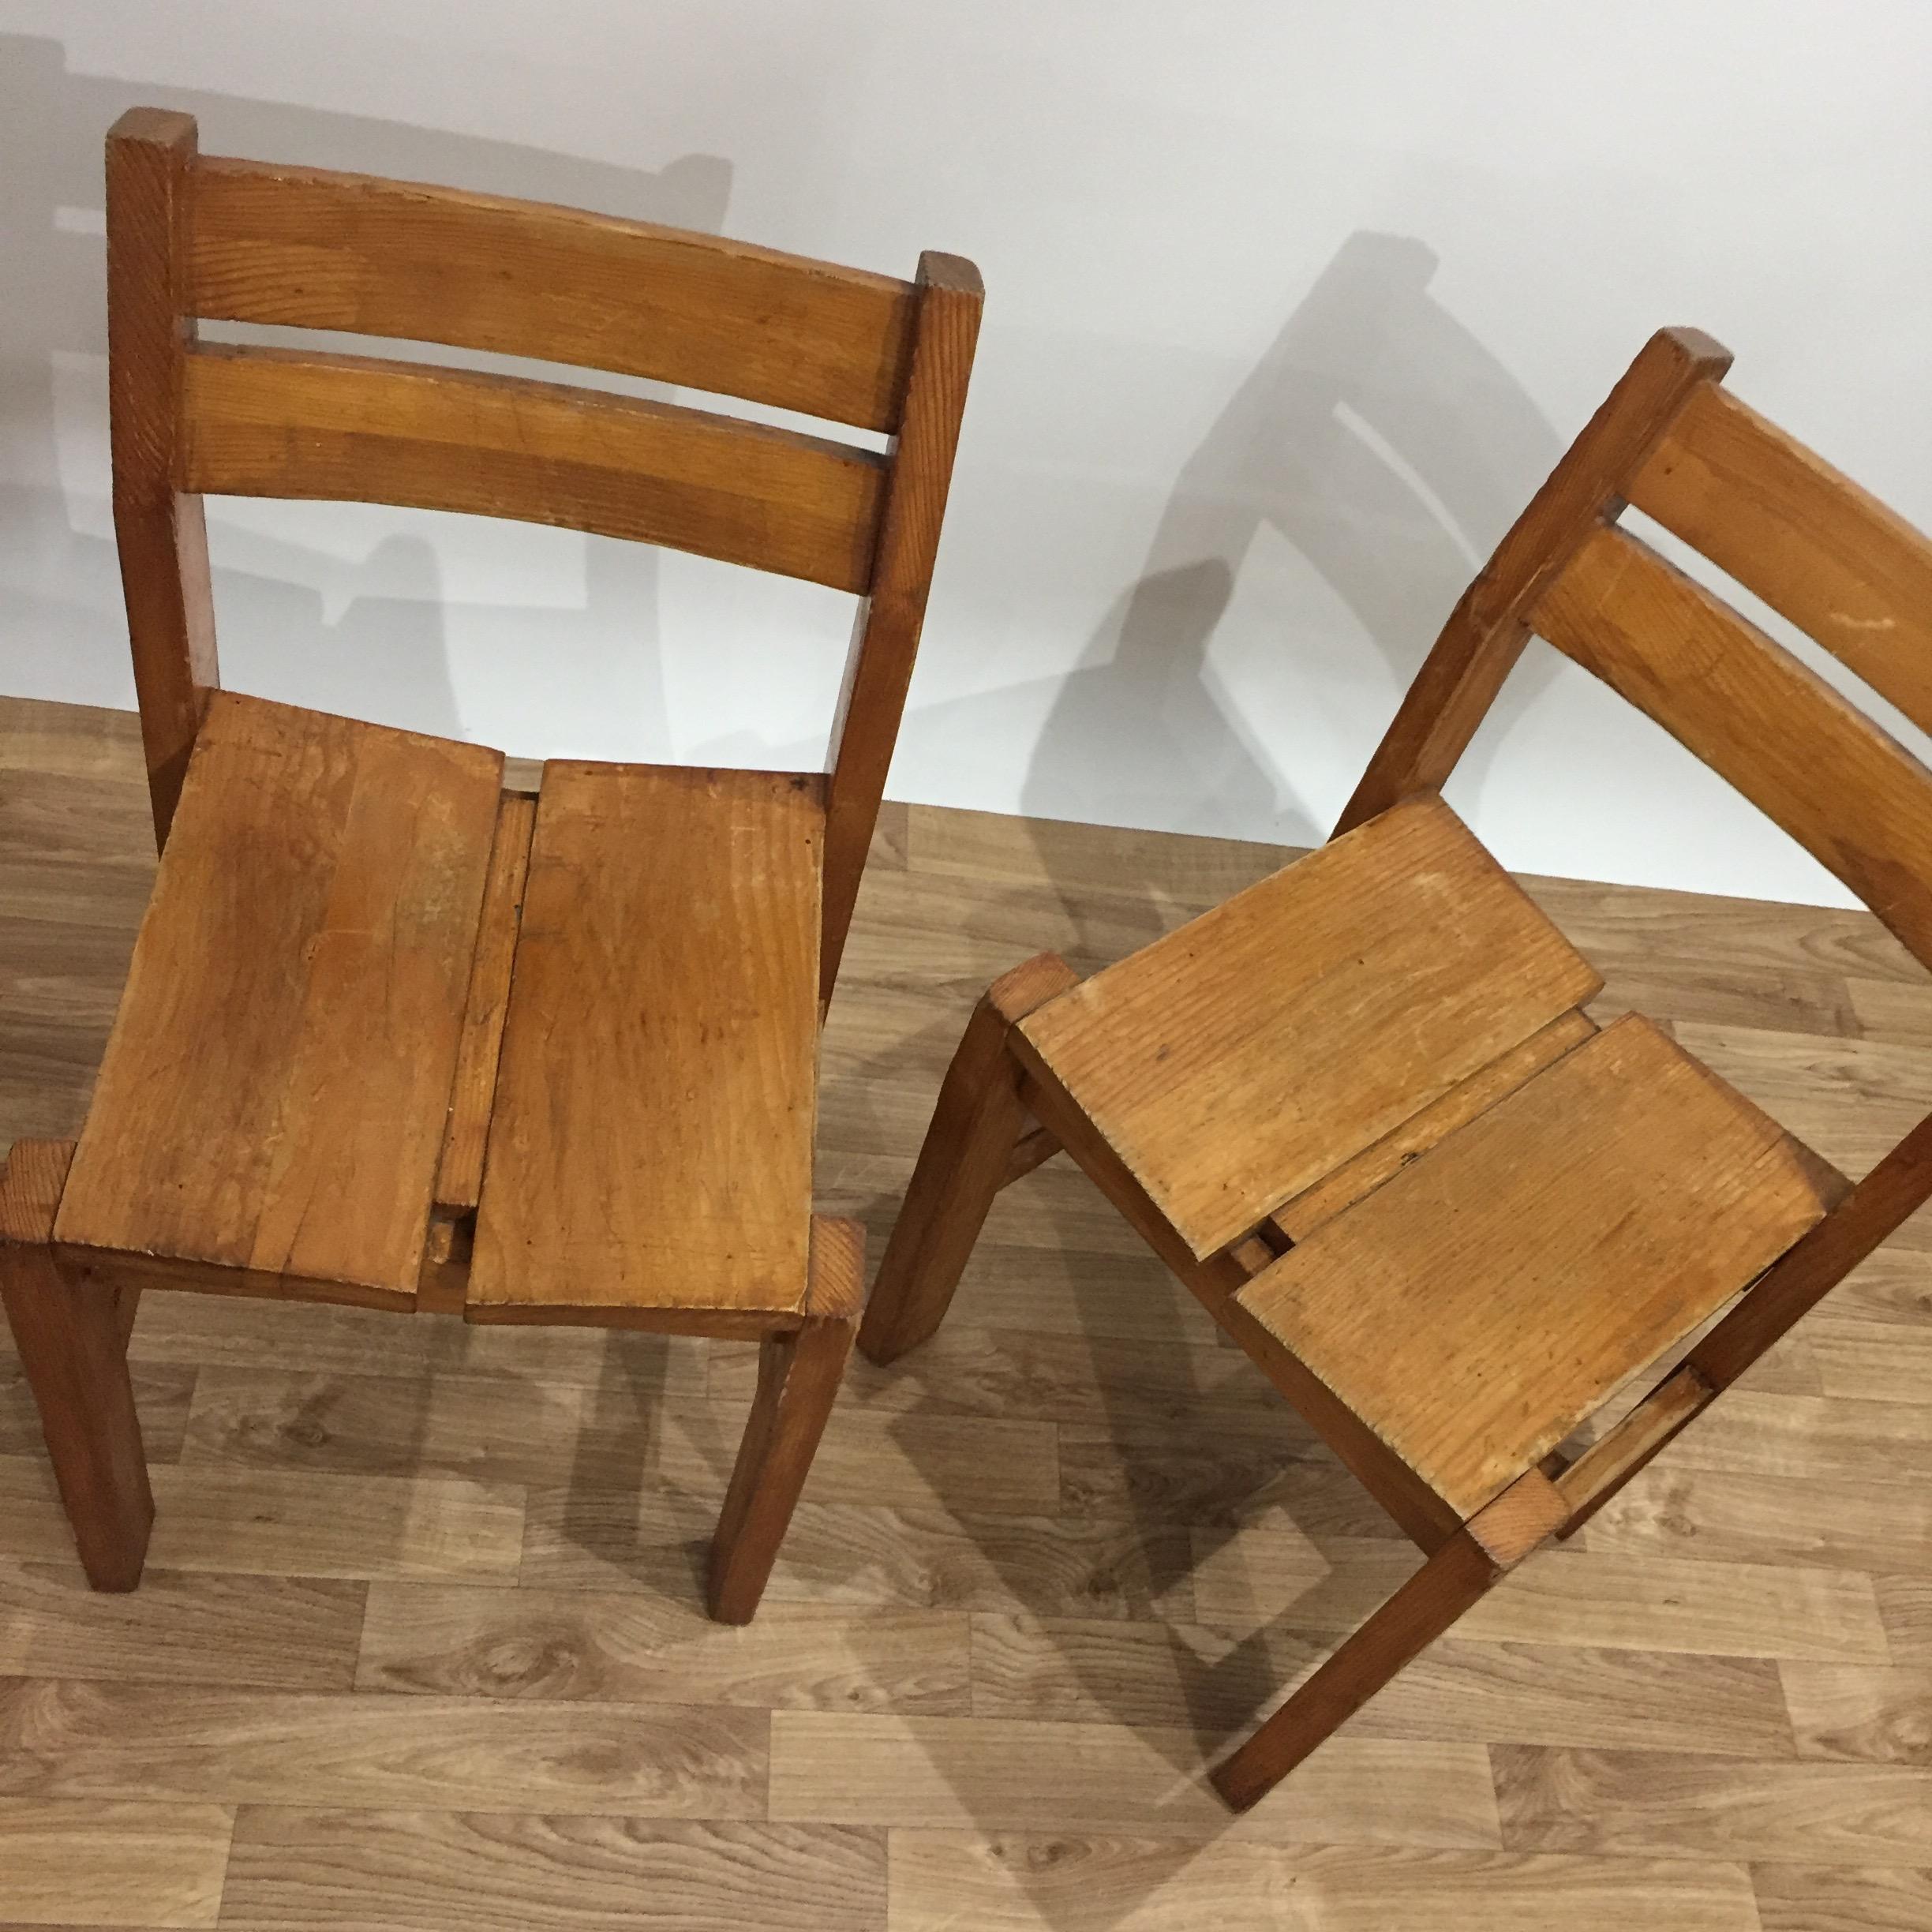 Rare pair of chairs designed for the project « La Cascade », the grouping of tilted apartments at Les Arcs 1600 ski resort supervised by the french designer Charlotte Perriand. Made in the mid-1960s Perriand designed all aspects of the lodgings at